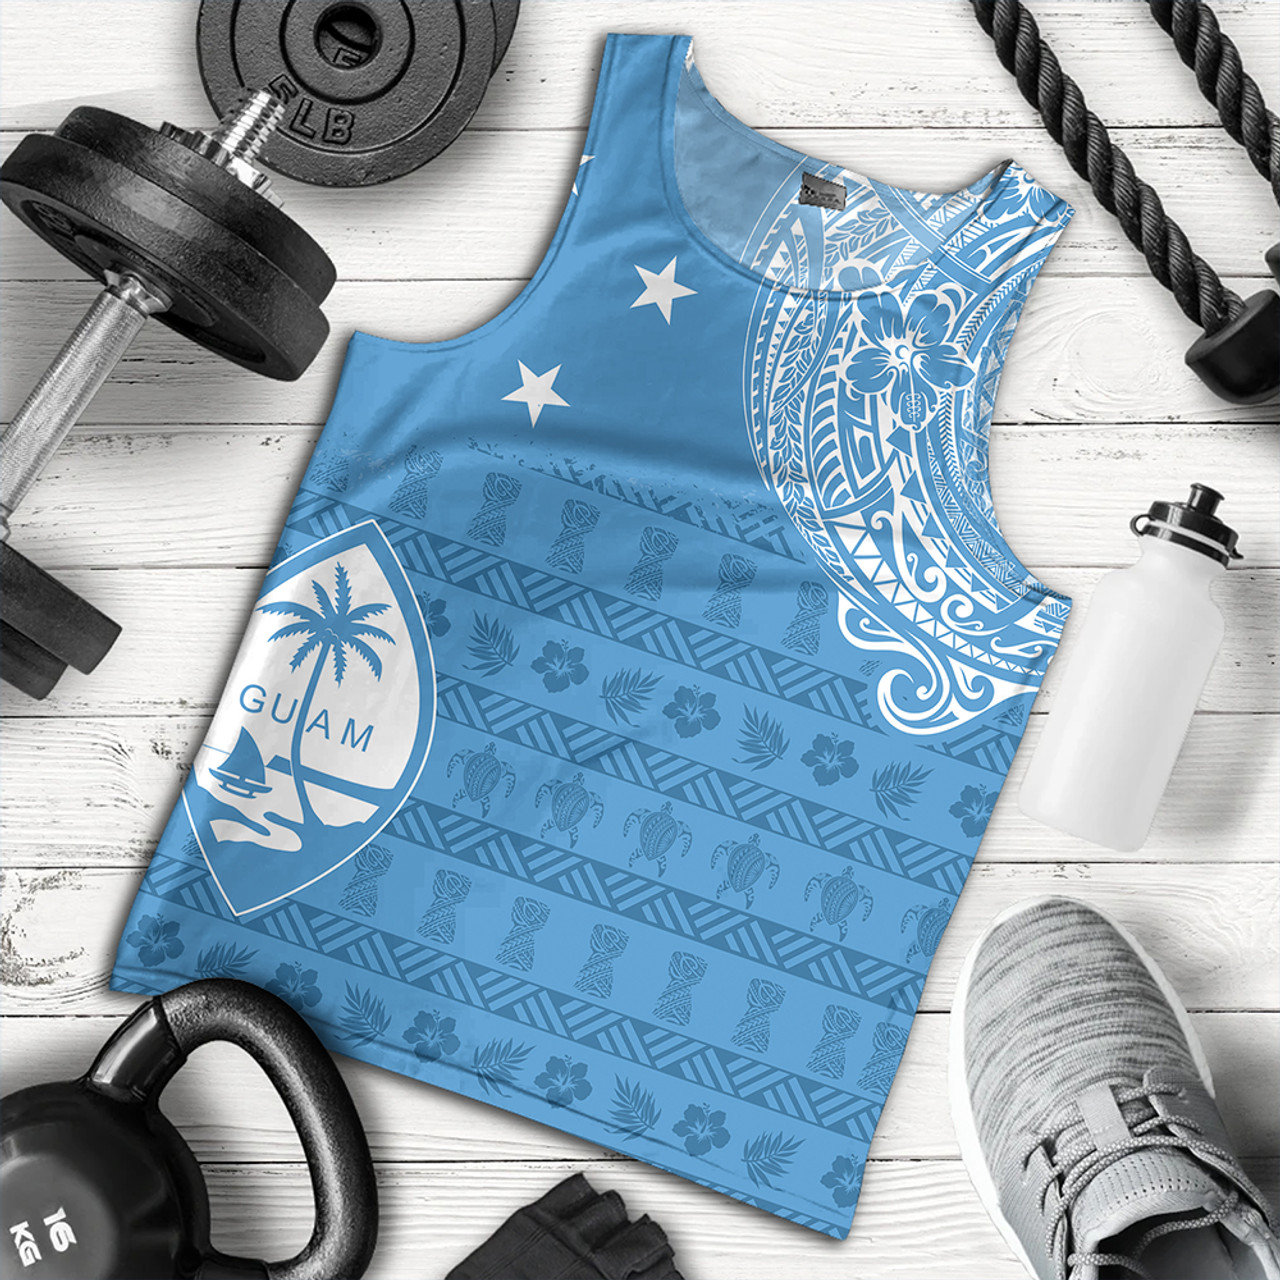 Guam Tank Top Micronesian Flag With Coat Of Arms